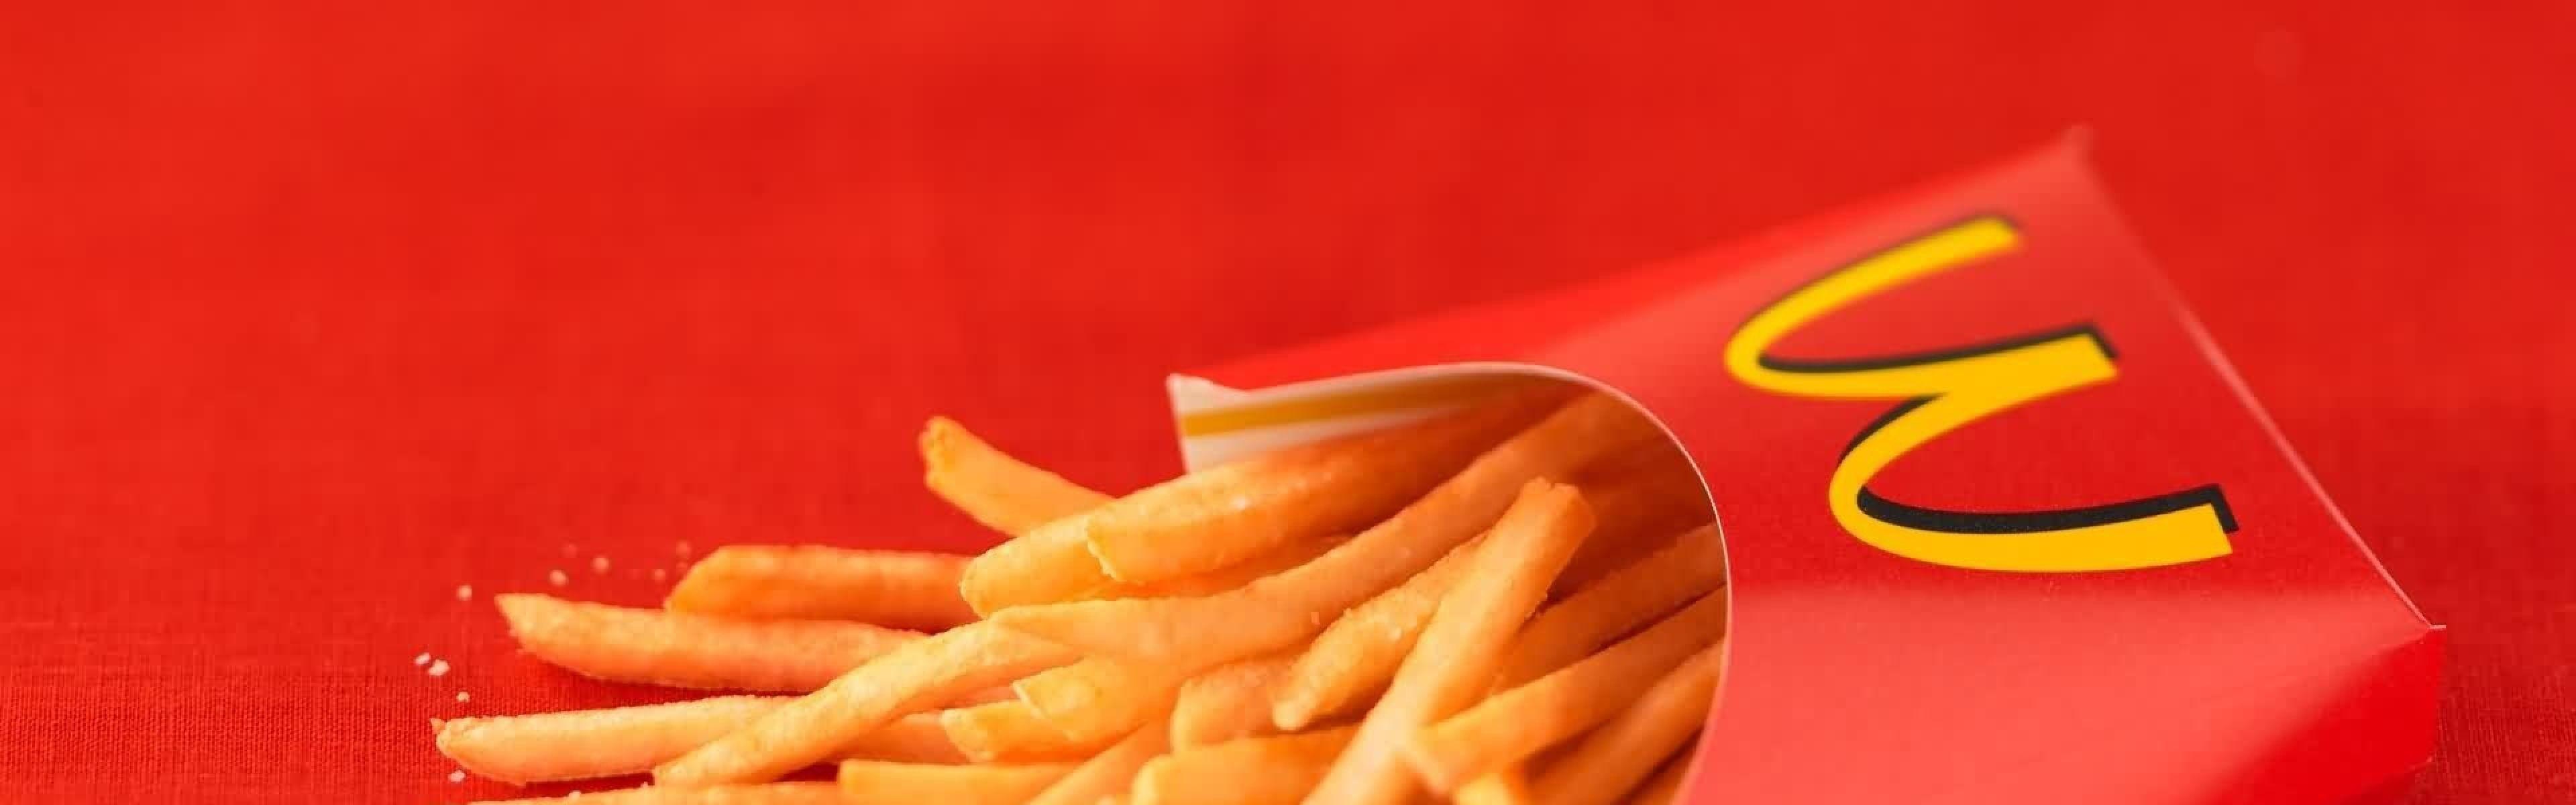 Download Wallpaper 3840x1200 Mcdonalds, French fries, Food, Fast